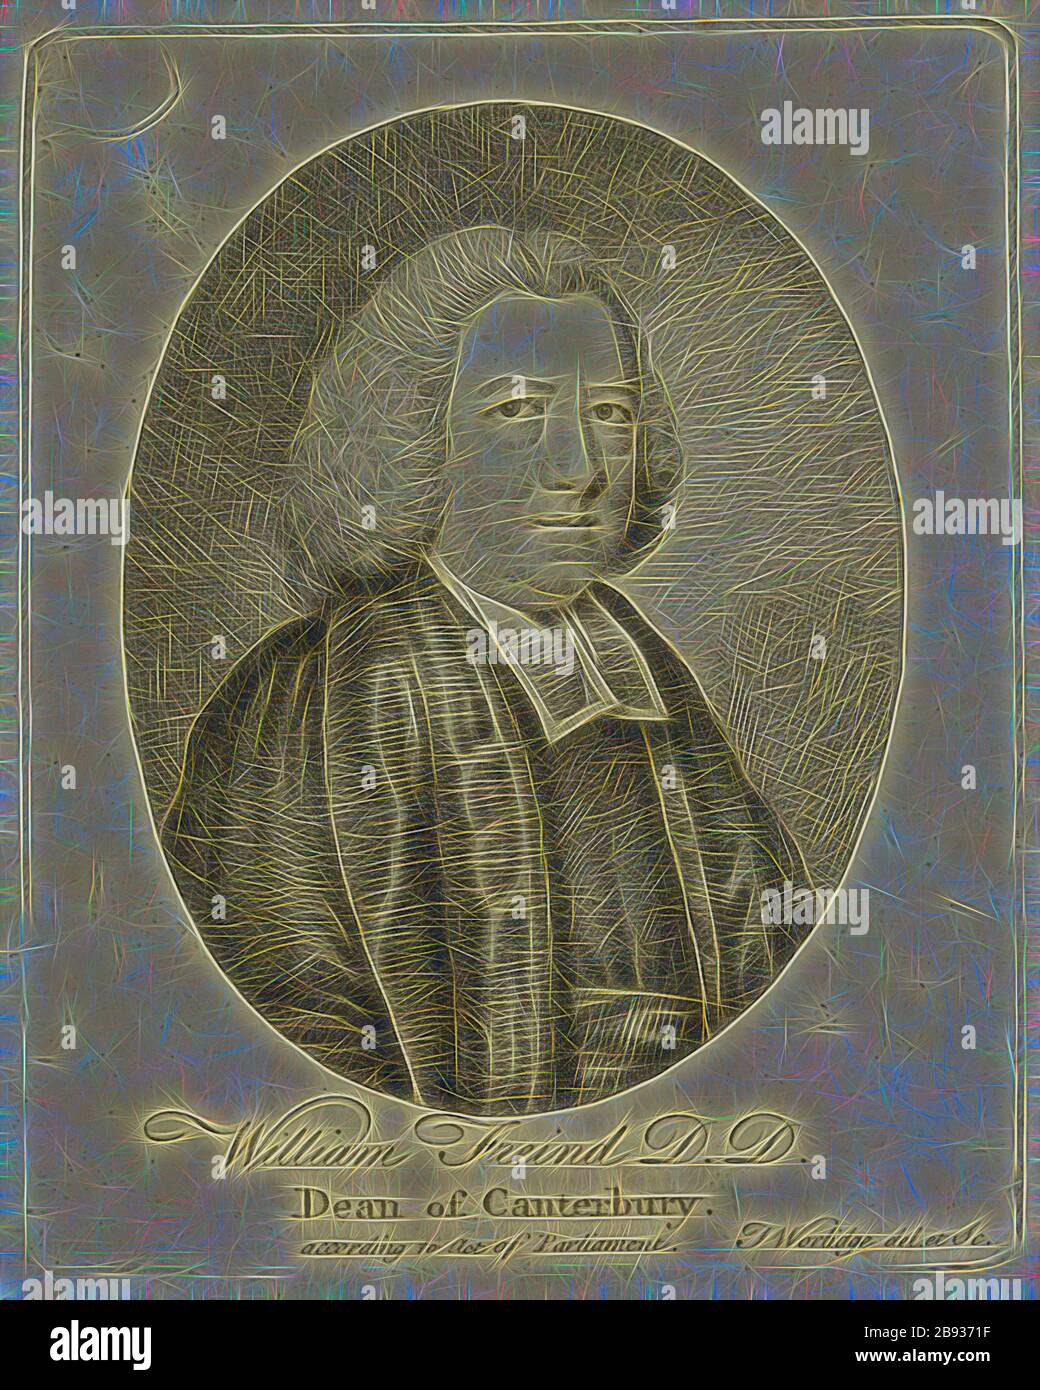 Thomas Worlidge, English, 1700-1766, William Freind D. D. Dean of Canterbury, 18th century, etching printed in black ink on laid paper, Plate: 3 5/8 × 2 7/8 inches (9.2 × 7.3 cm), Reimagined by Gibon, design of warm cheerful glowing of brightness and light rays radiance. Classic art reinvented with a modern twist. Photography inspired by futurism, embracing dynamic energy of modern technology, movement, speed and revolutionize culture. Stock Photo